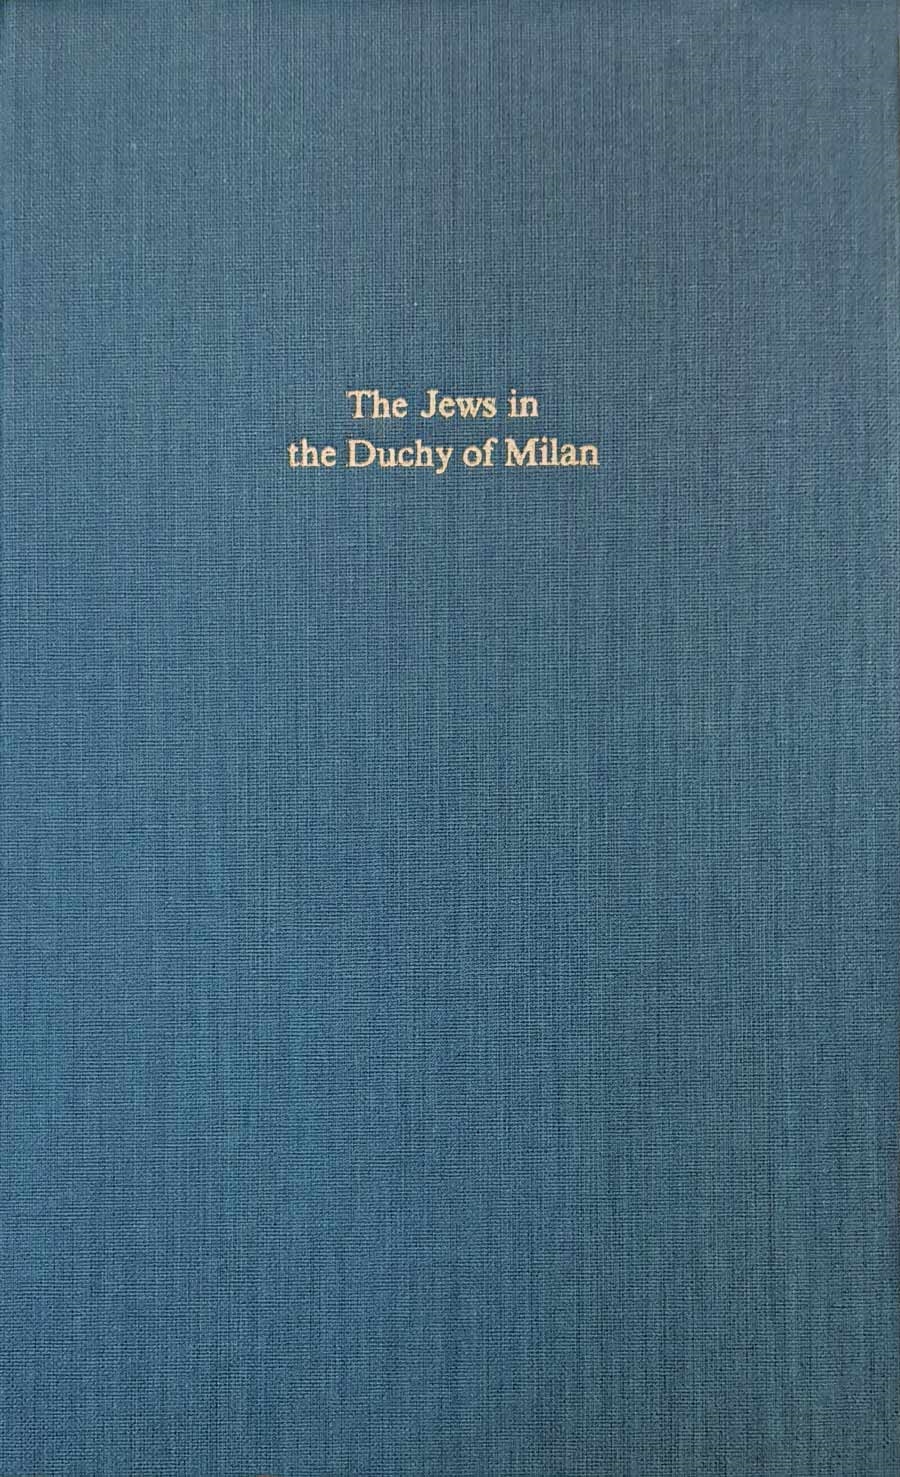 The Jews in the Duchy of Milan